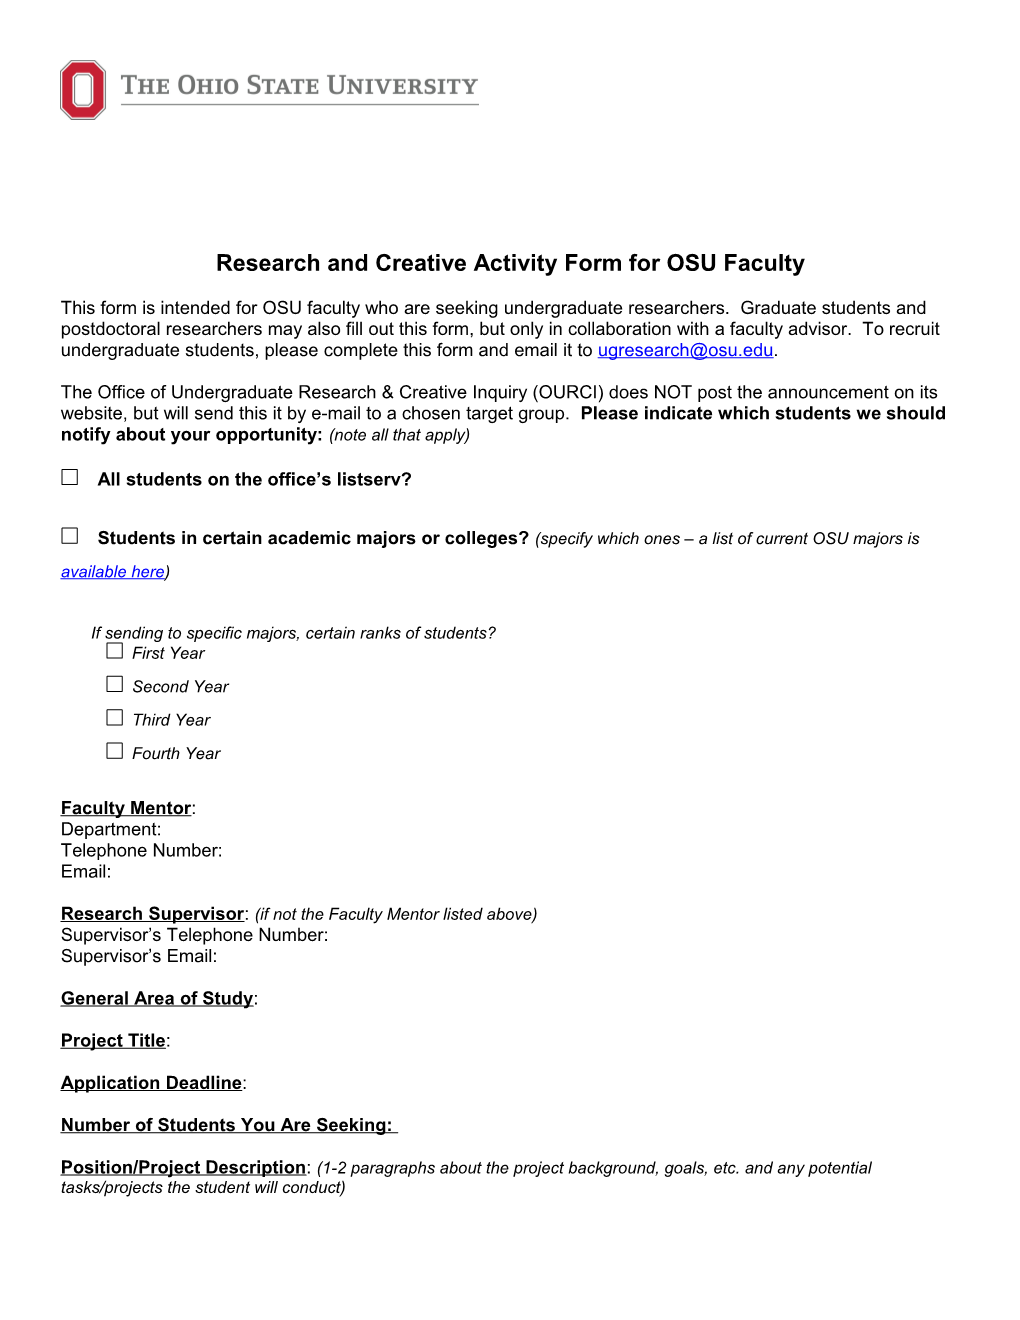 Research and Creative Activity Form for OSU Faculty